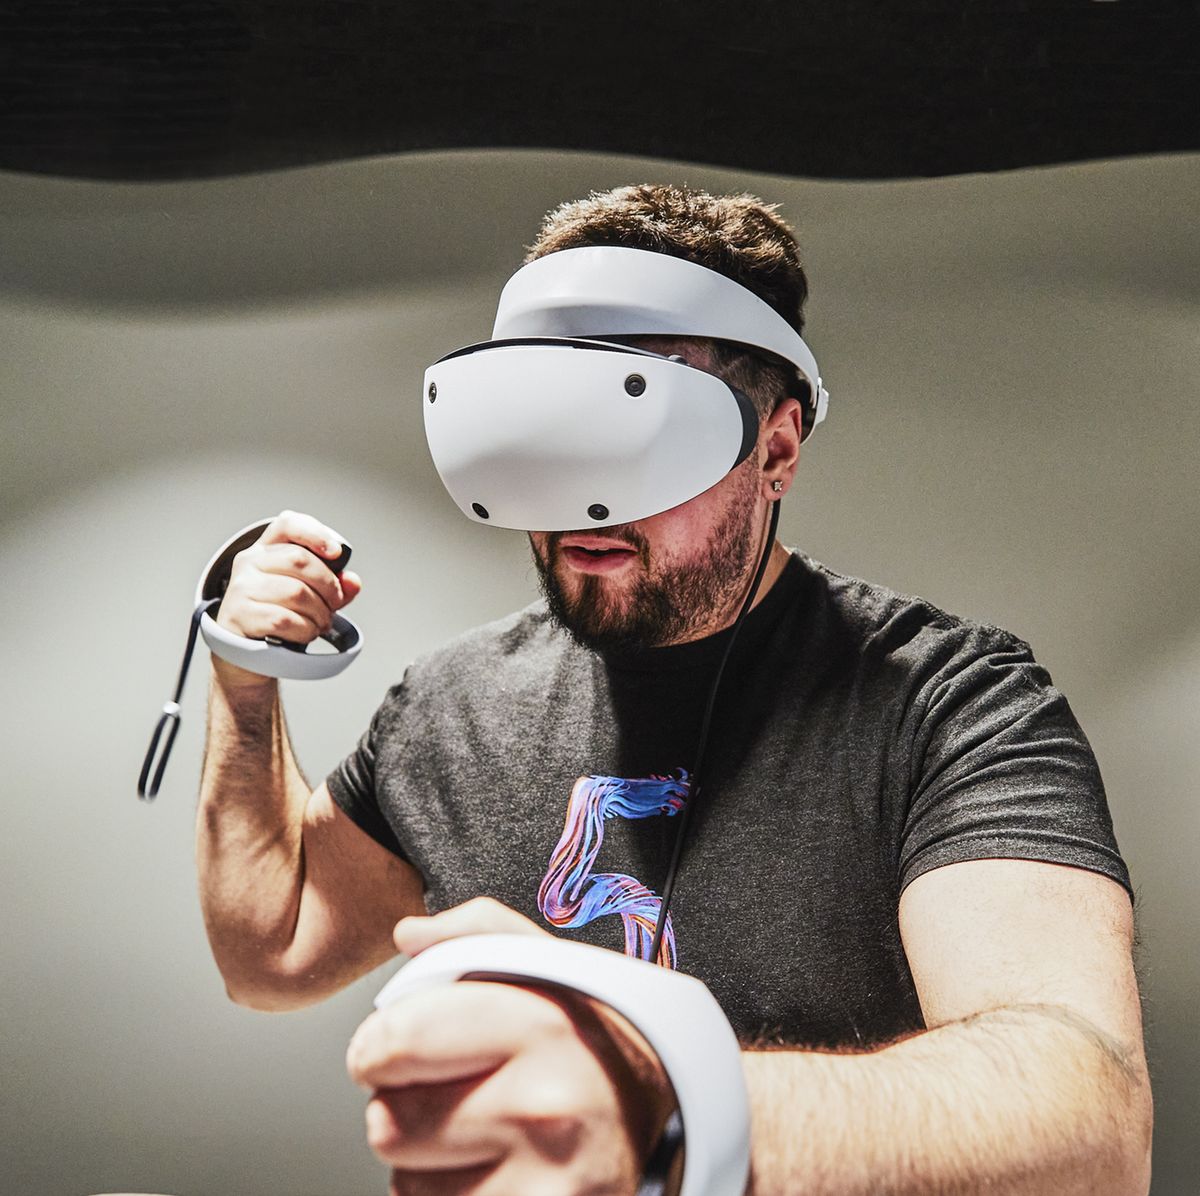 Oculus Quest' Easy, Fun VR For the Masses